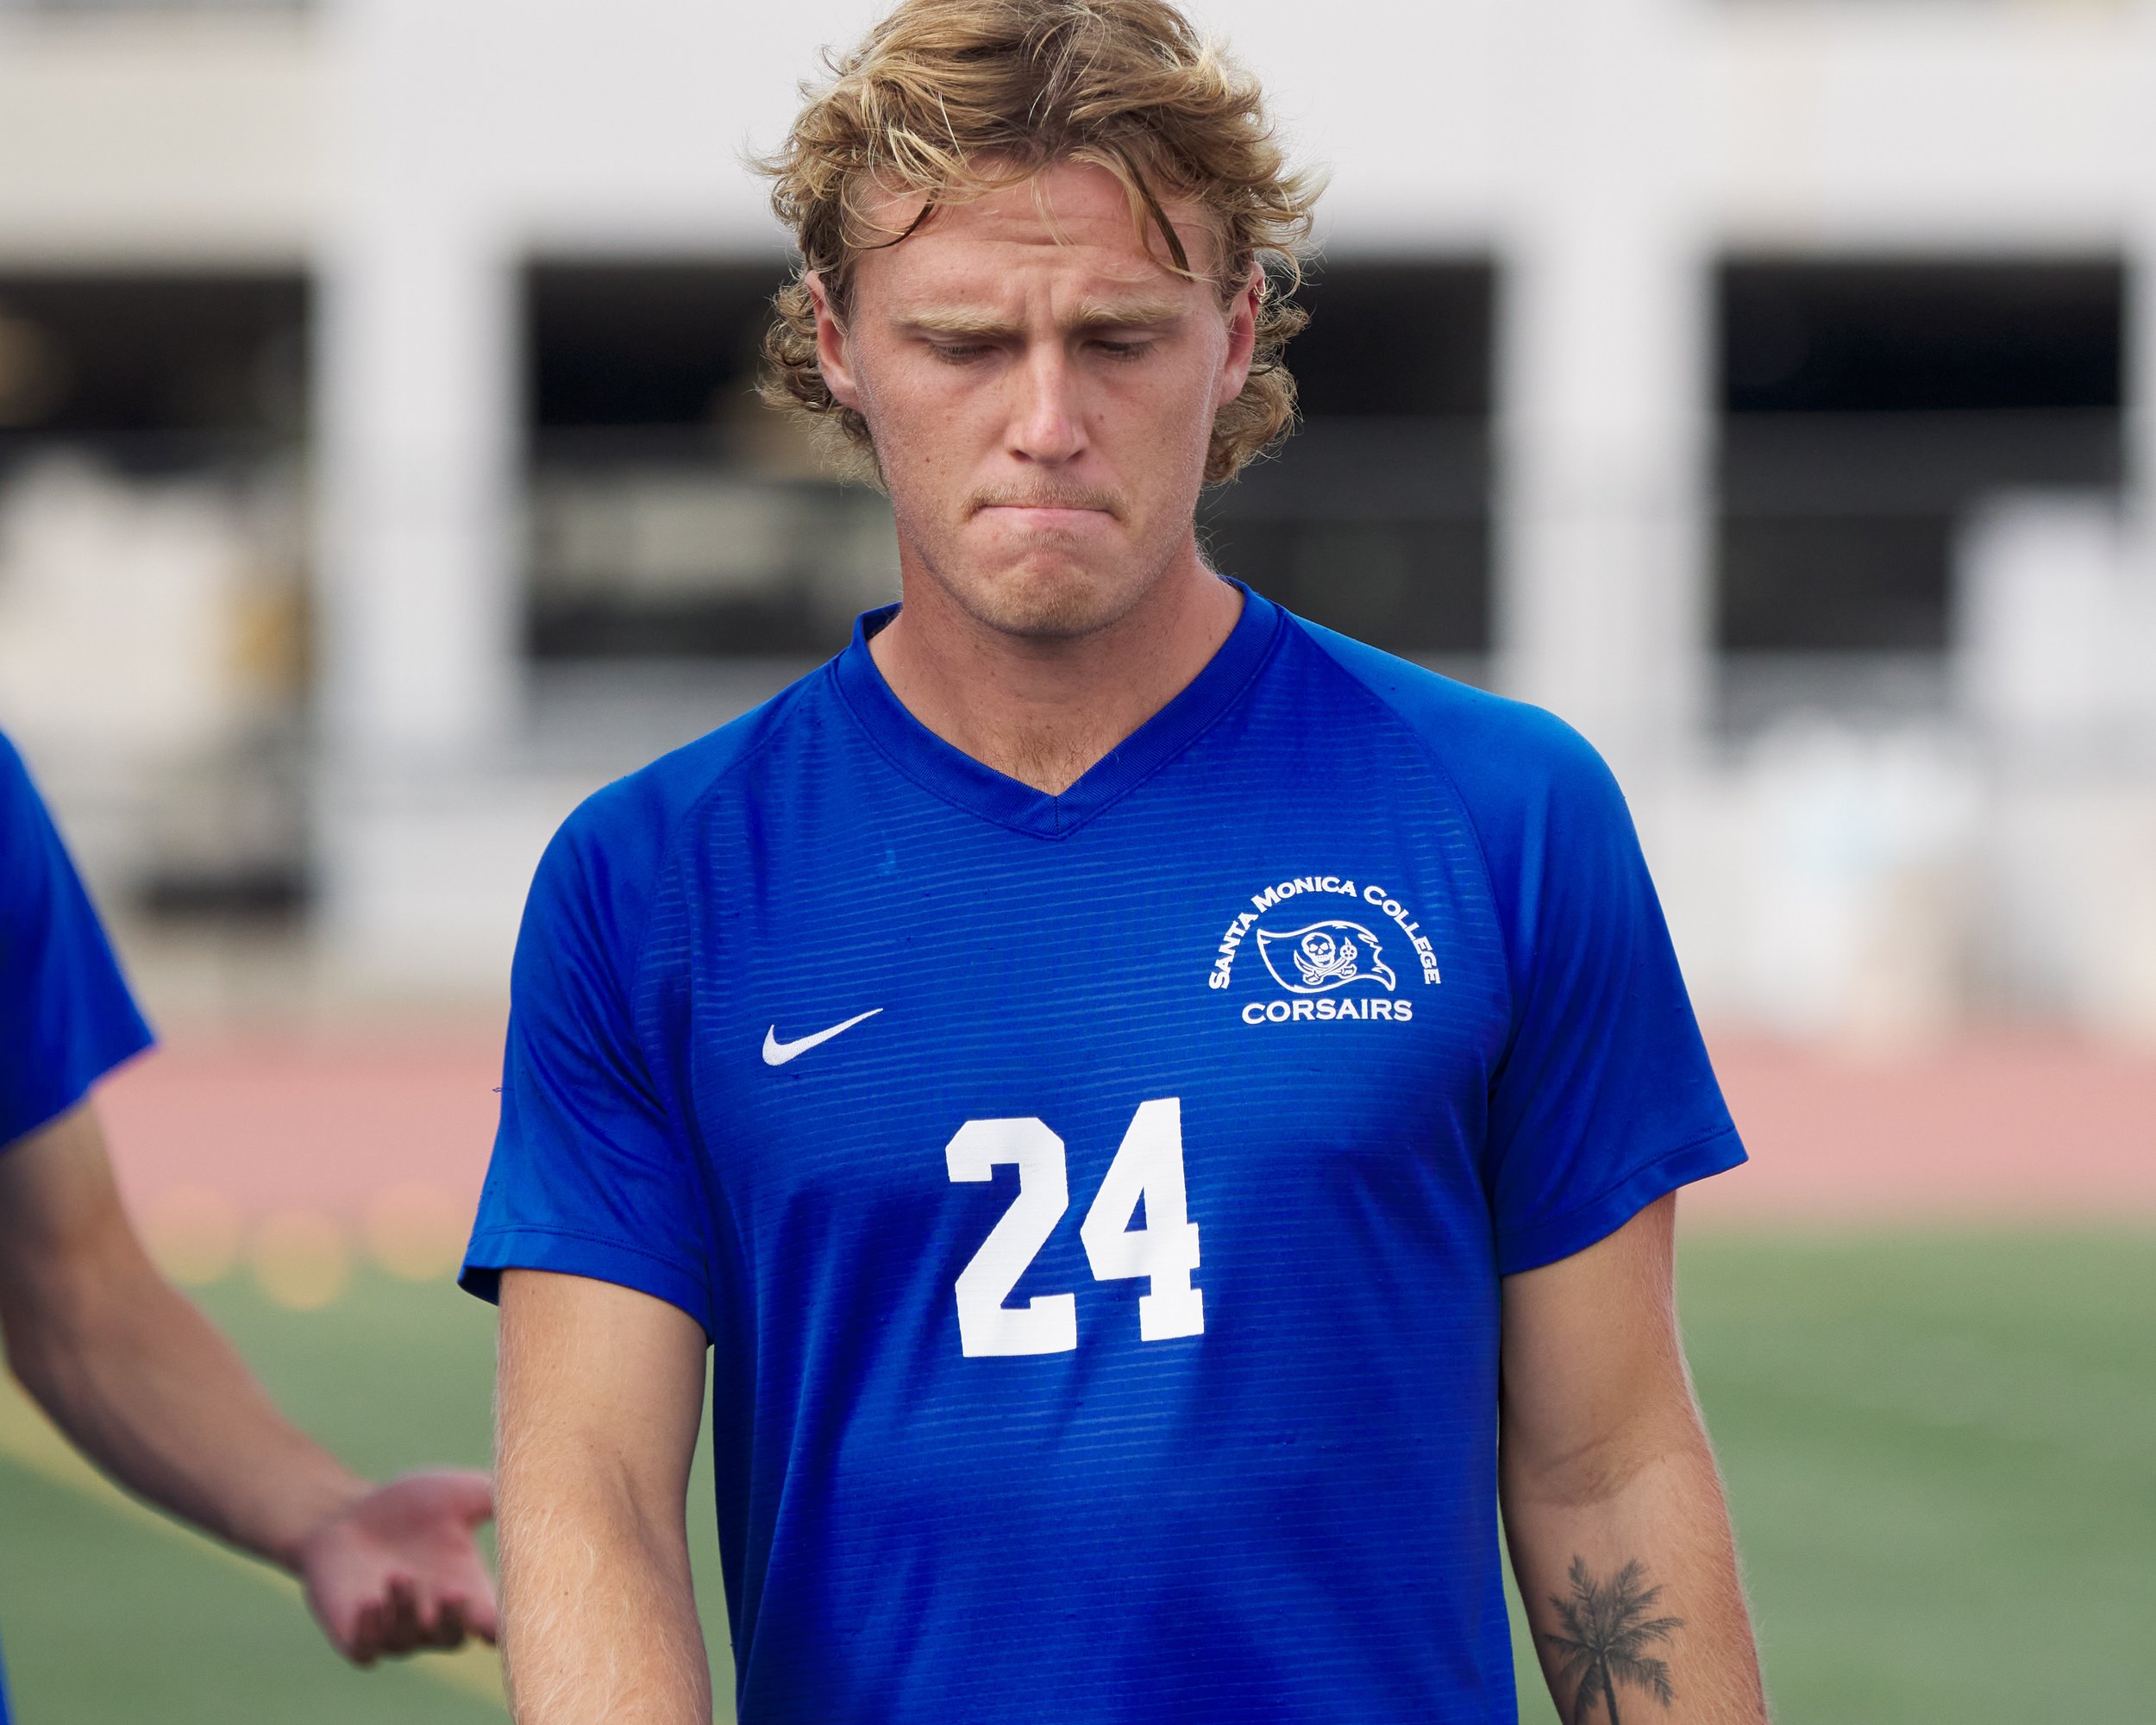  Santa Monica College Corsairs' Alexander Lalor during the men's soccer match against the Los Angeles Mission College Eagles on Tuesday, Nov. 1, 2022, at Corsair Field in Santa Monica, Calif. The Corsairs won 3-0. (Nicholas McCall | The Corsair) 